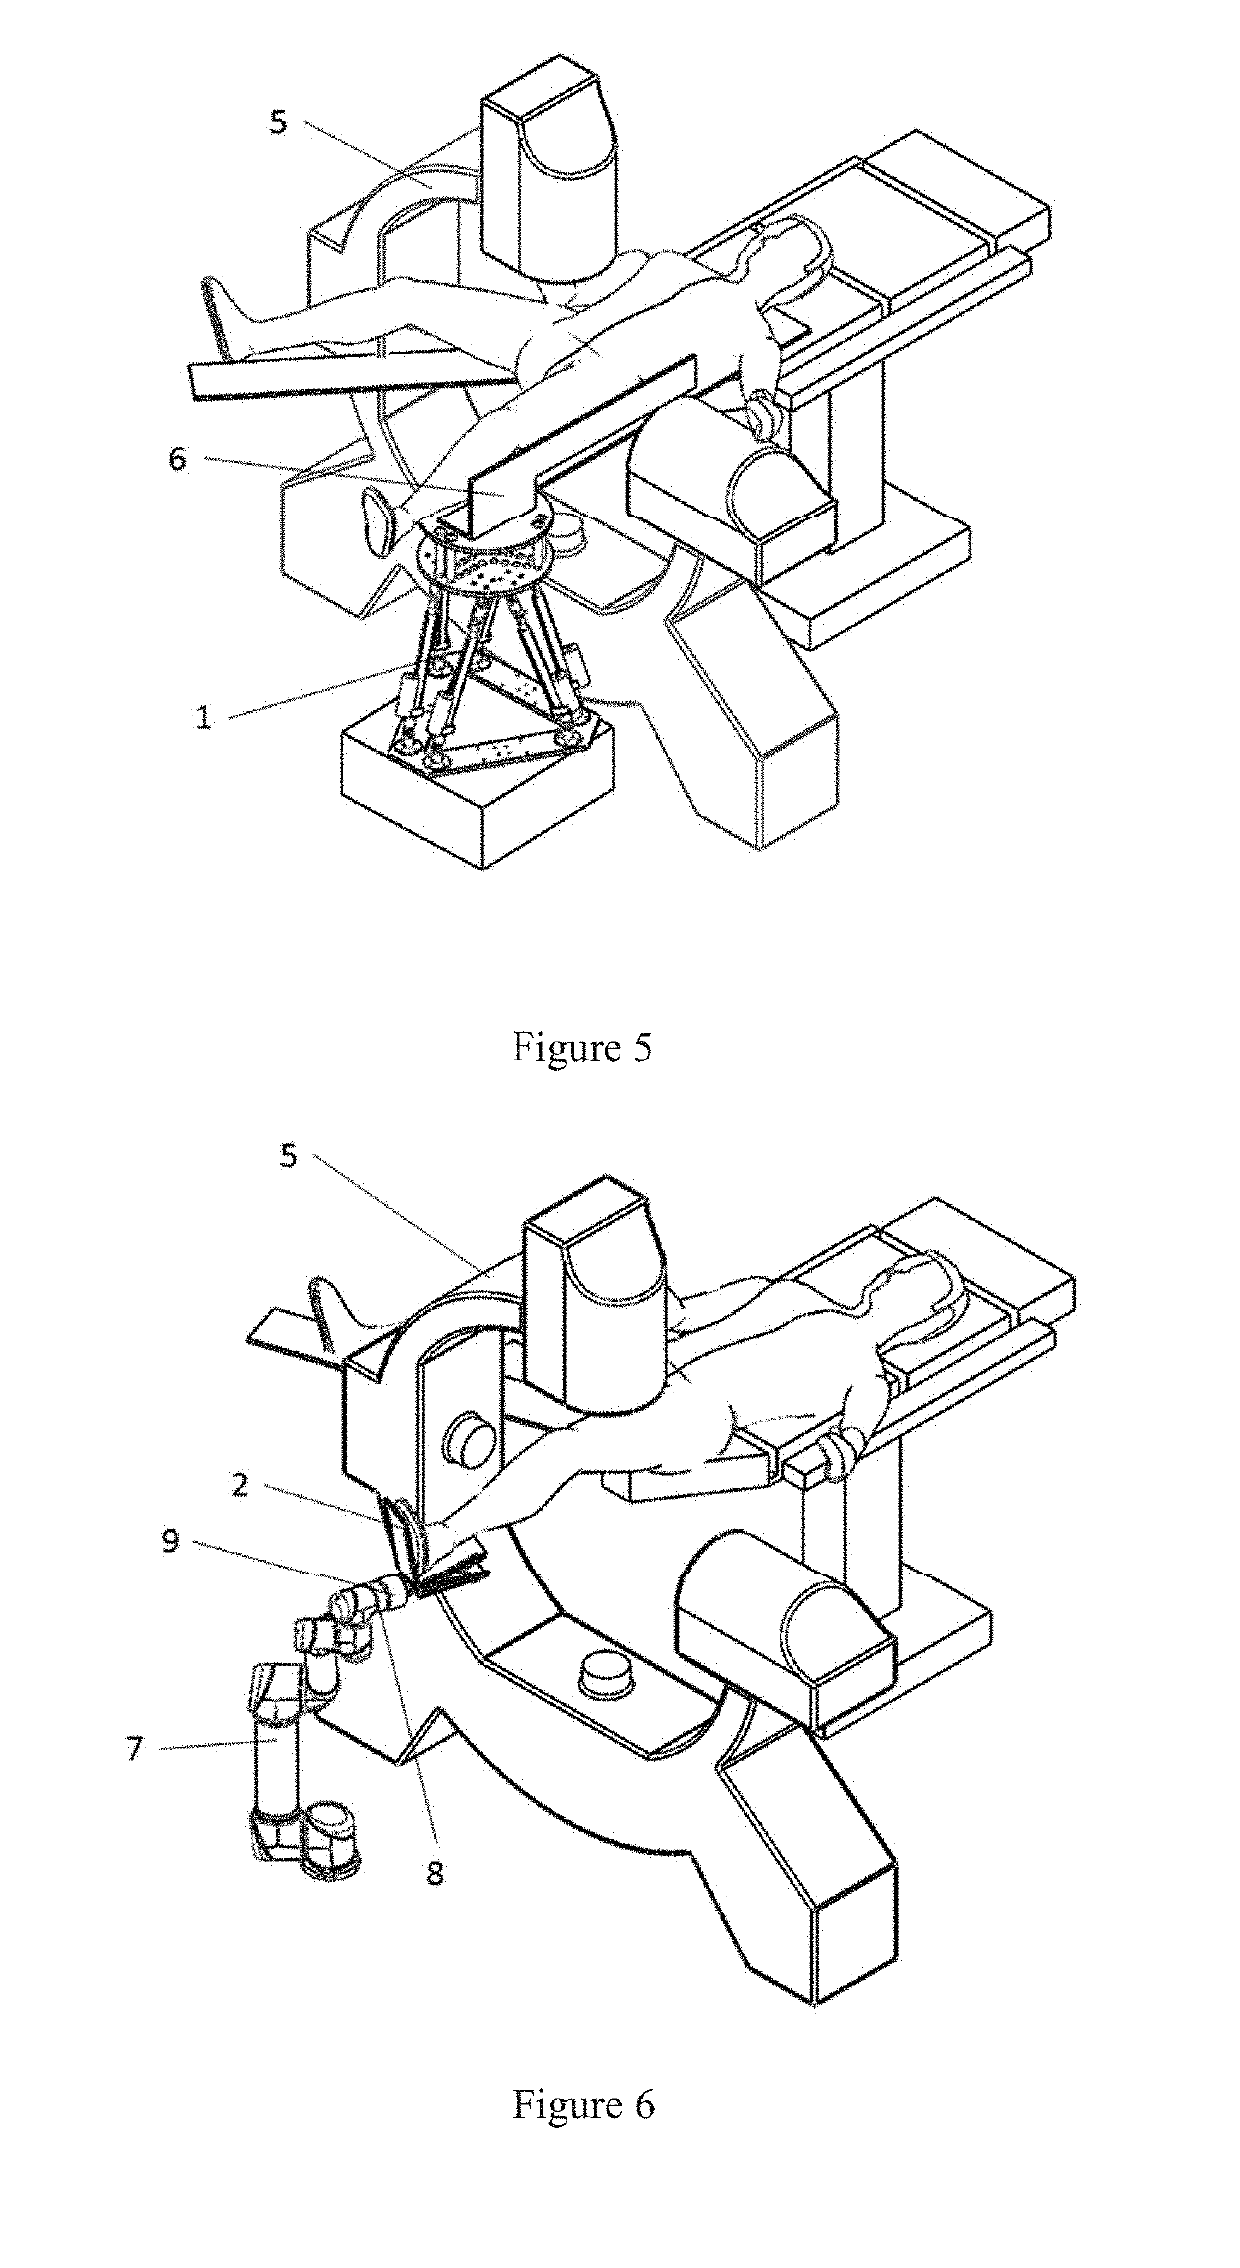 Remotely Operated Orthopedic Surgical Robot System for Fracture Reduction with Visual-servo Control Method